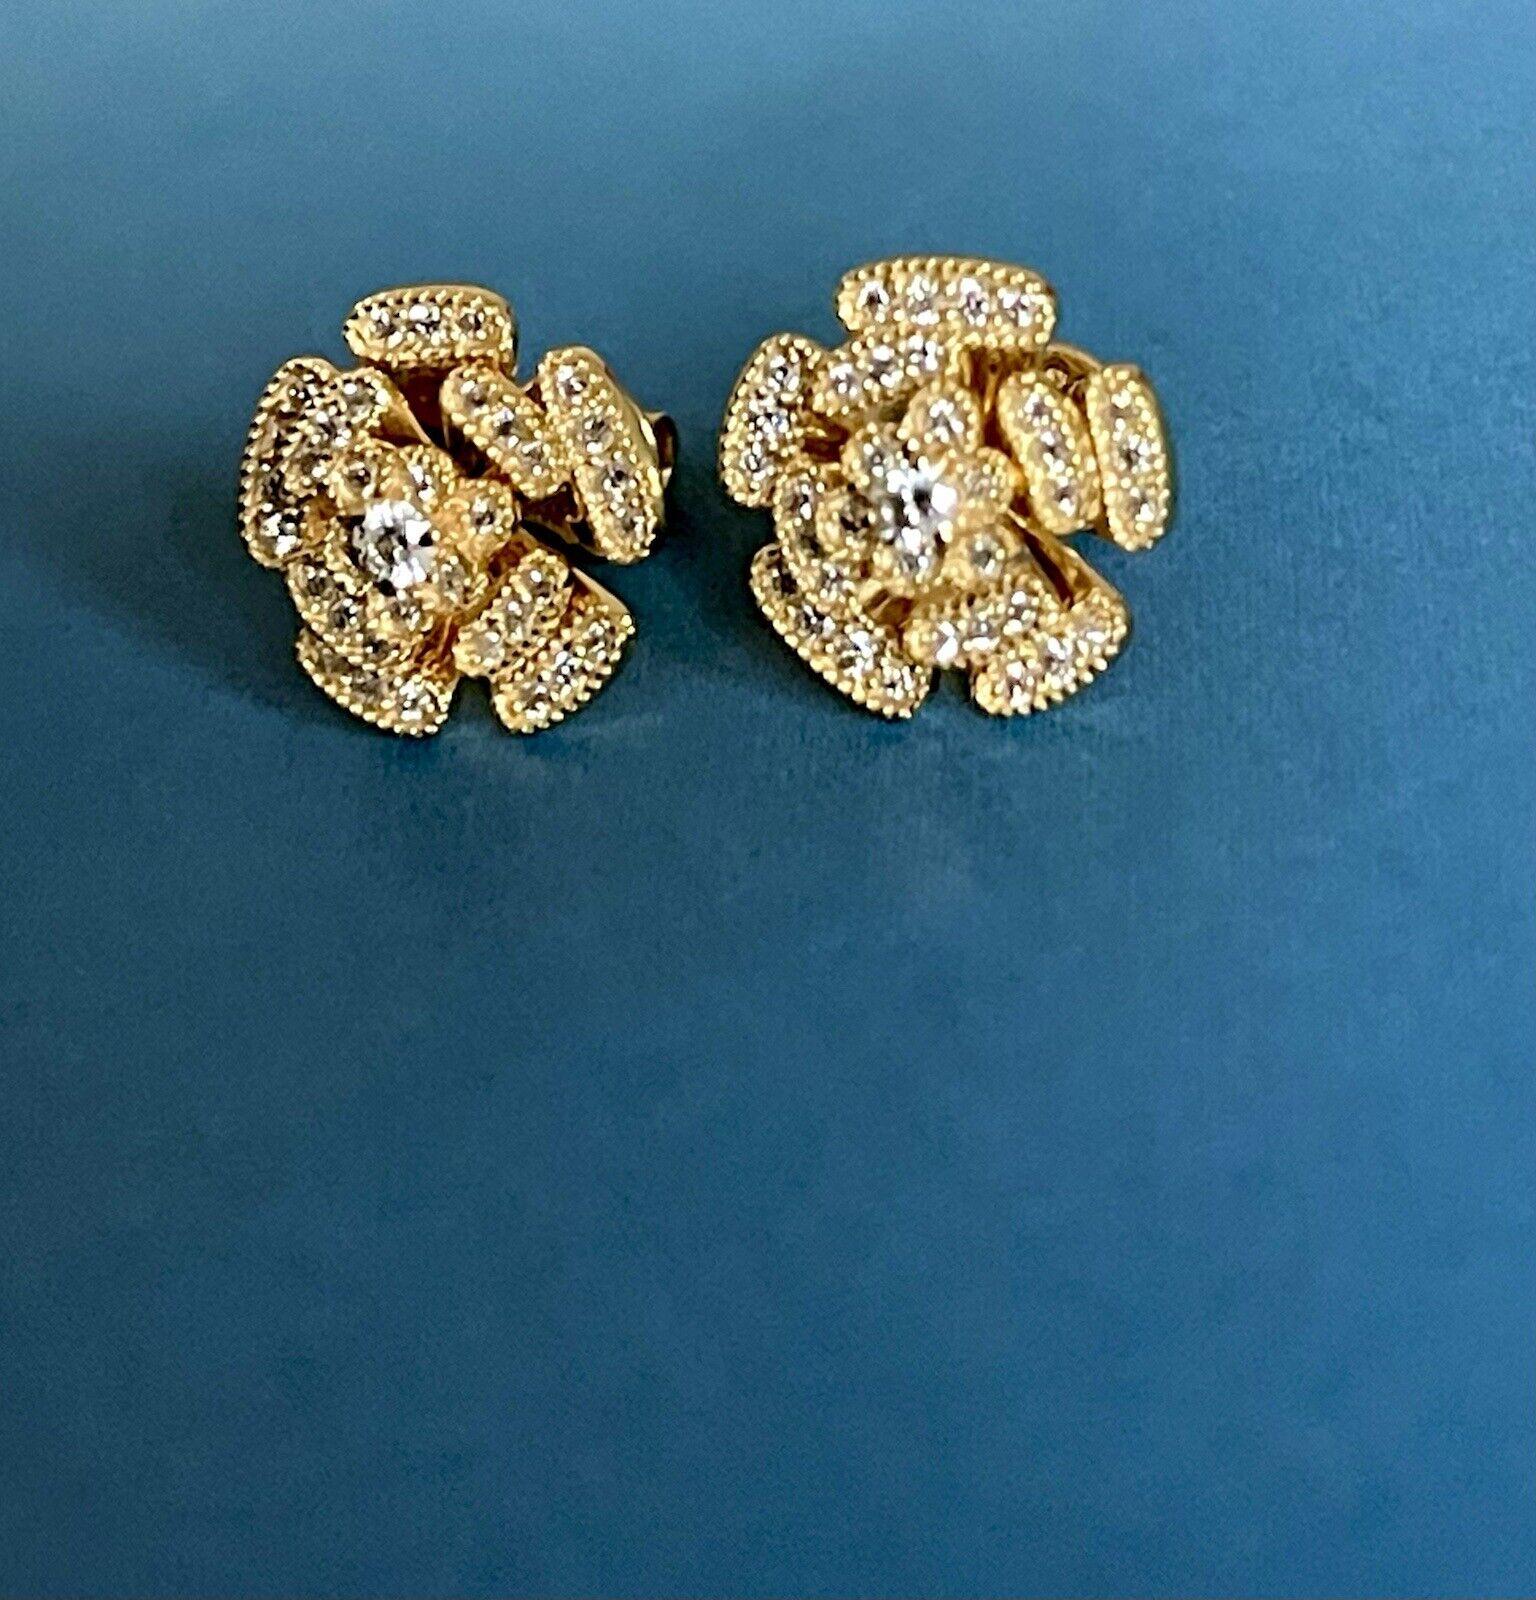 Cervin Blanc 18ct Yellow Gold Diamond Earrings 0.50ct Alpine Rose Studs VS For Sale 2